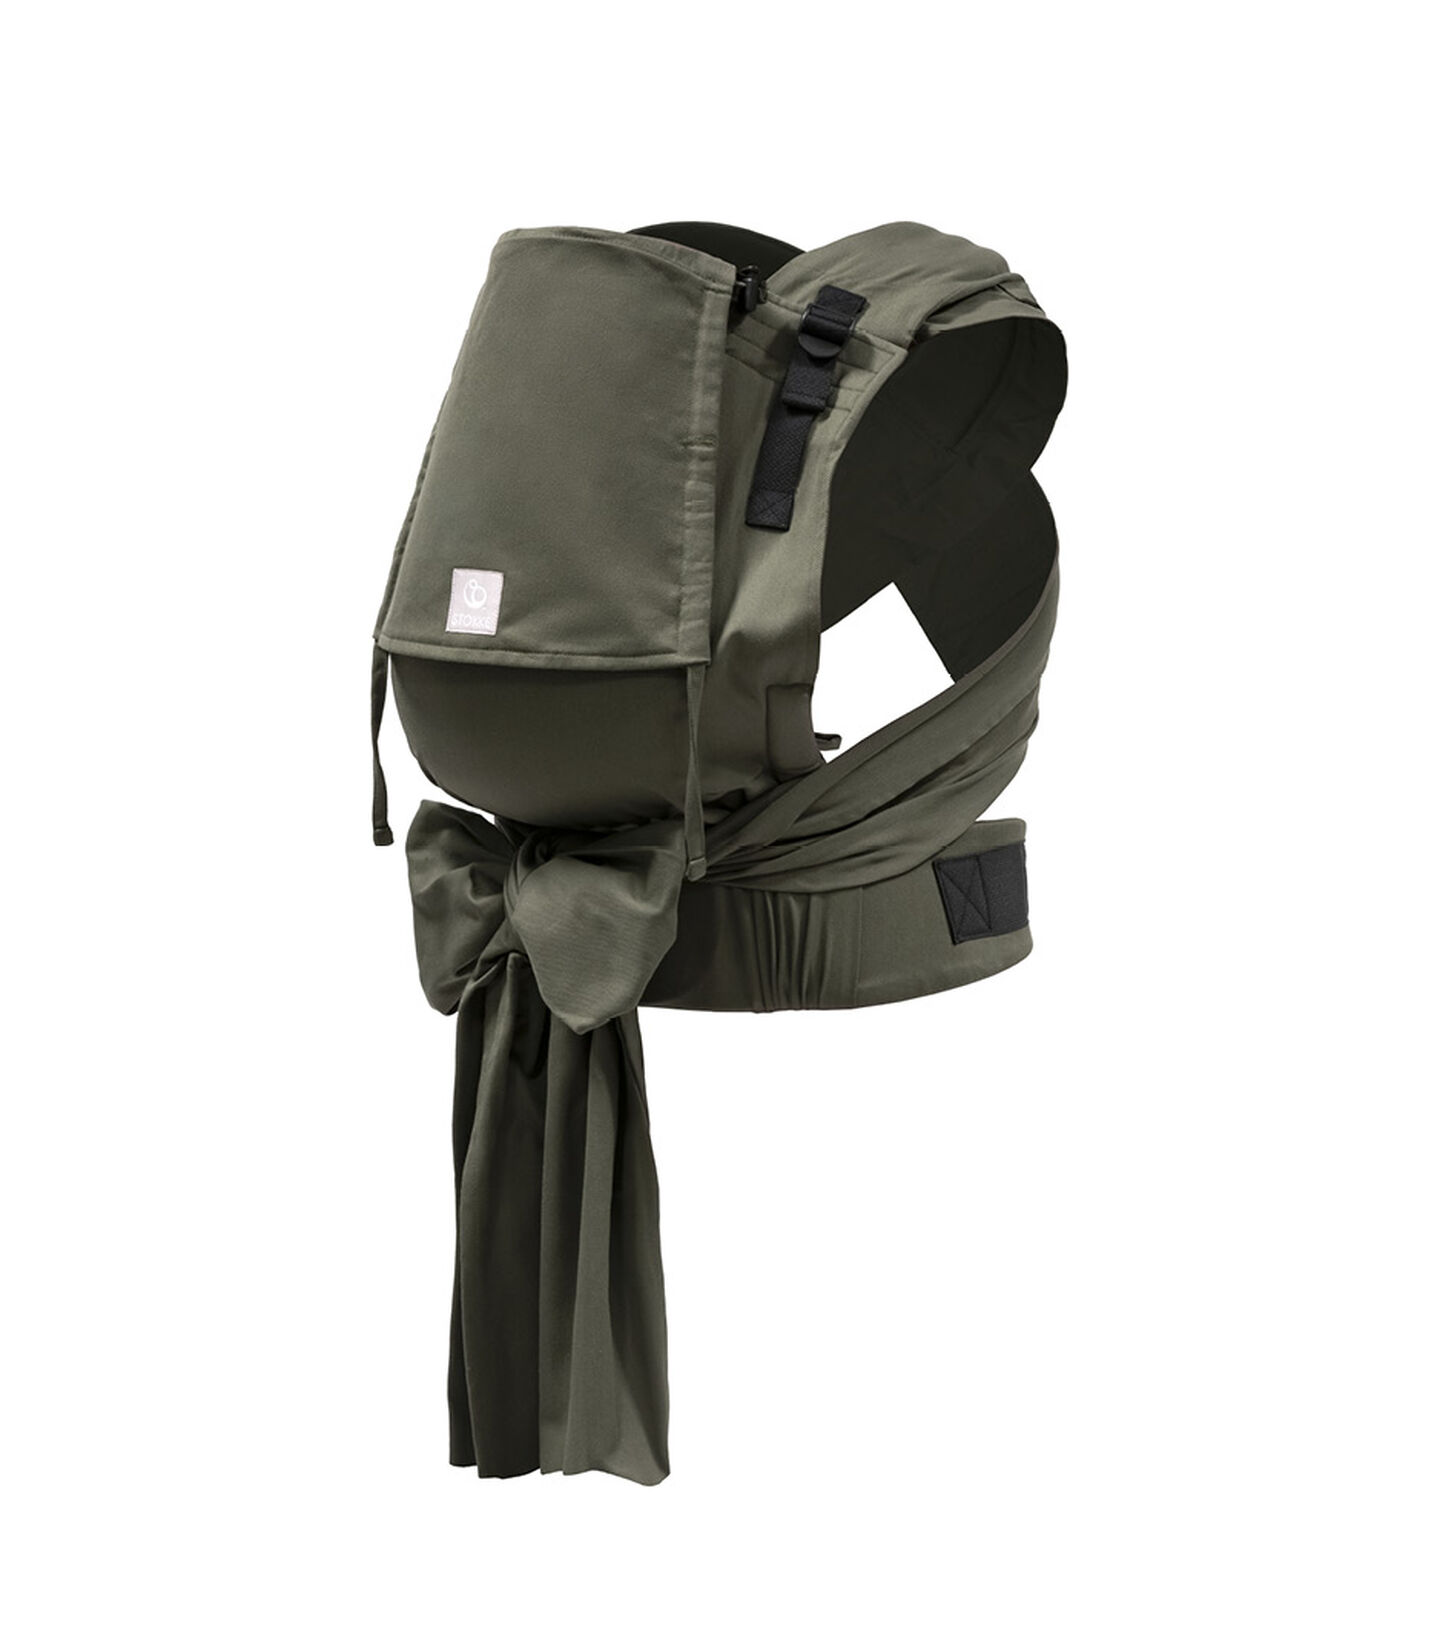 Stokke® Limas™ Babytrage Plus Olive Green OCS, Olive Green, mainview view 1